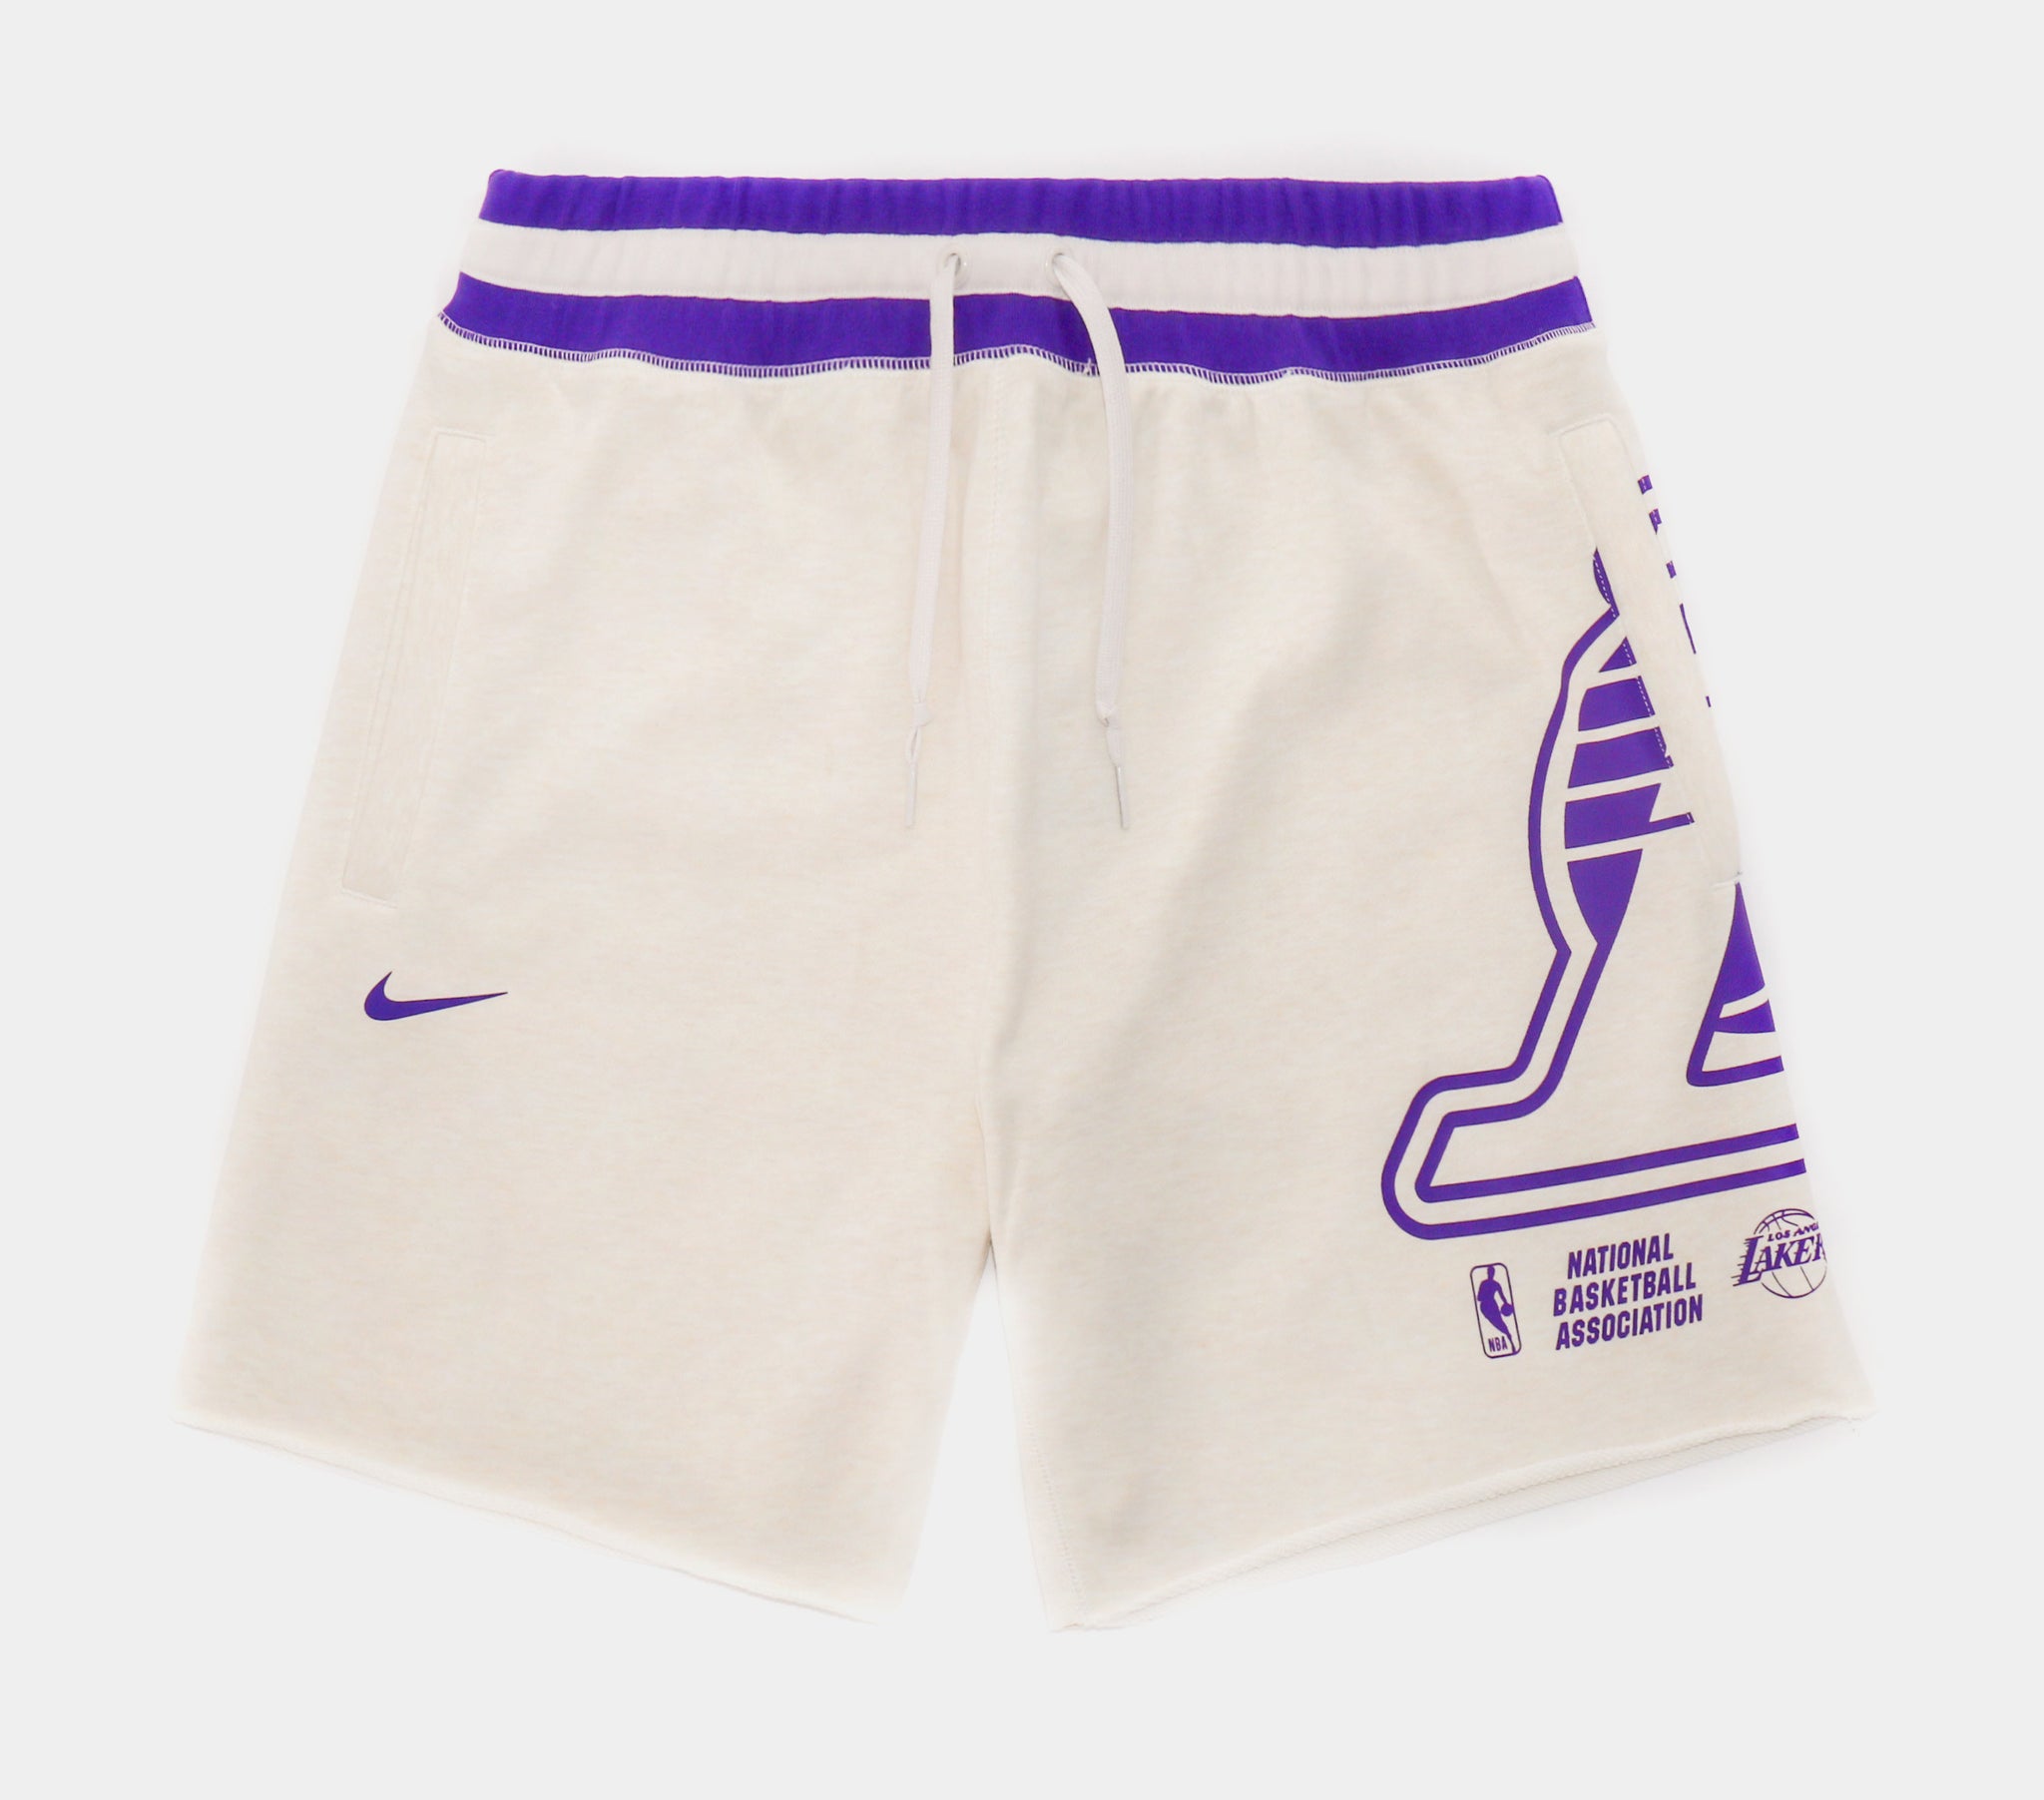 Nike NBA Authentics Compression Shorts Men's White/Light Gray New with Tags  2XLT 188